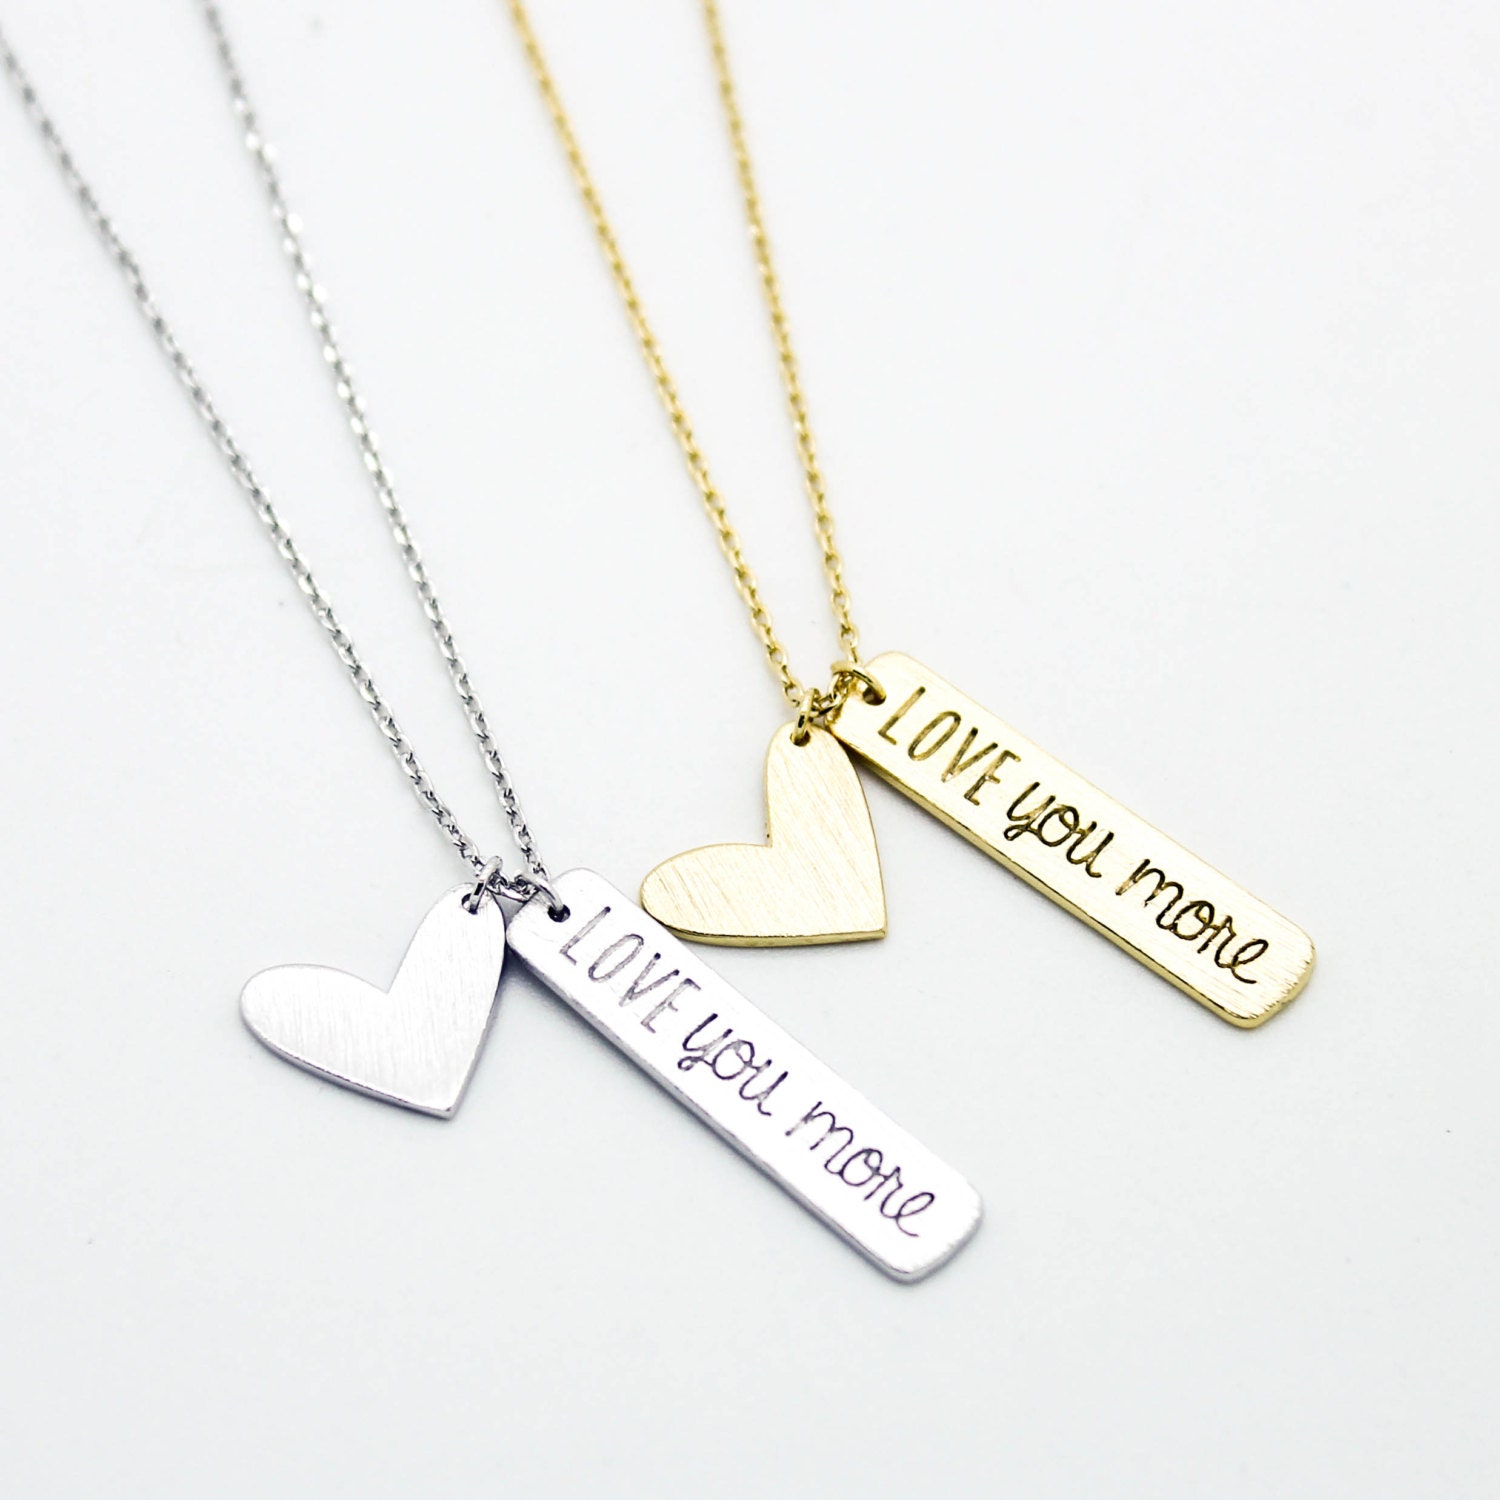 Love you more gold plated necklace pretty lovely cute